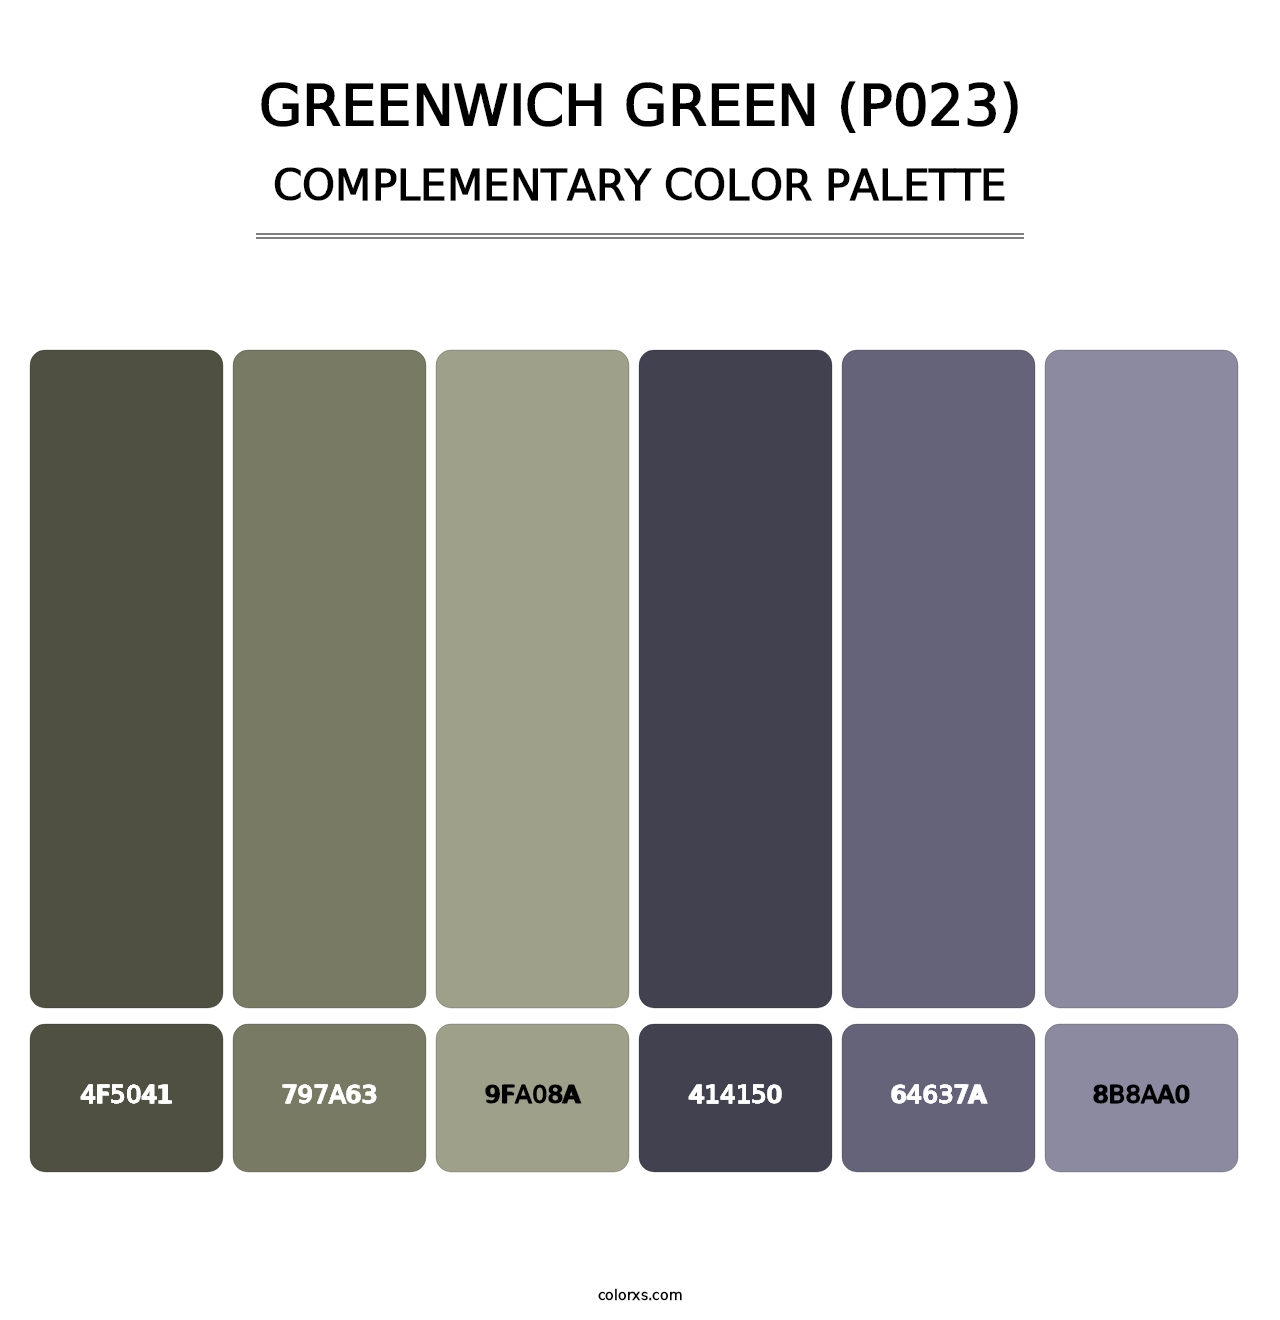 Greenwich Green (P023) - Complementary Color Palette